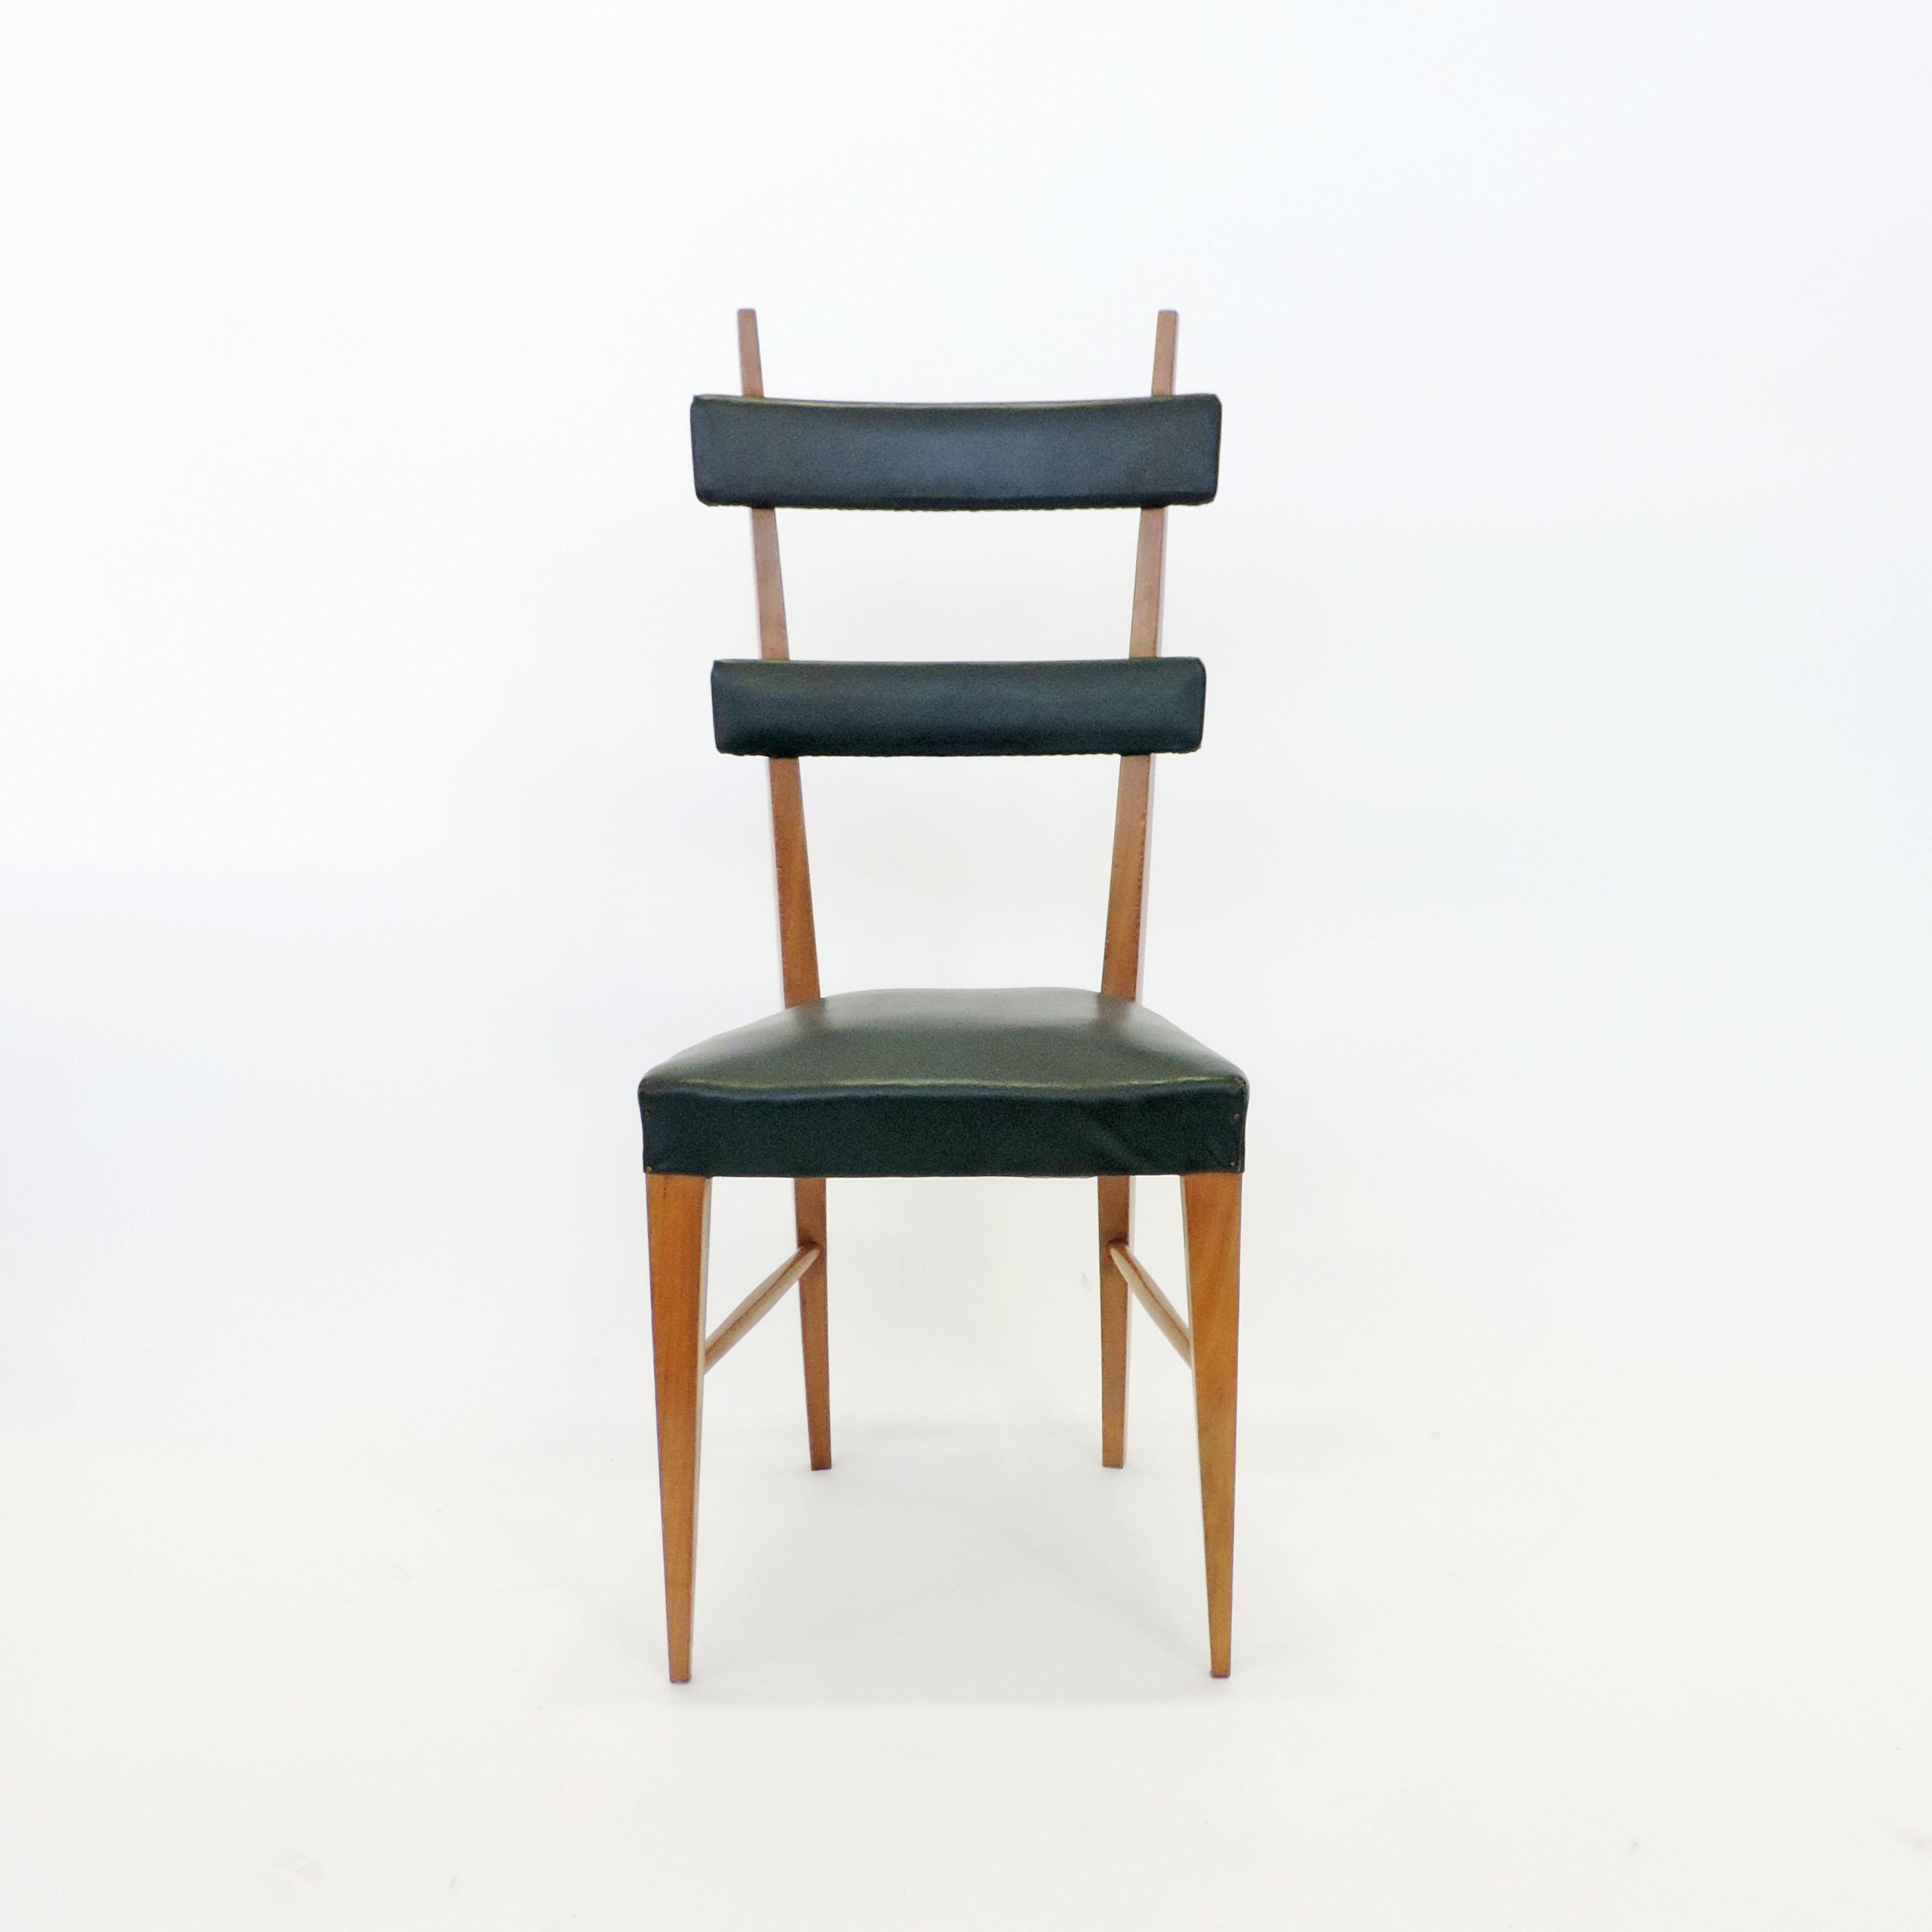 Set of 6 Italian 1950s high back dining chairs.
In original faux leather upholstery / would need reupholstery.